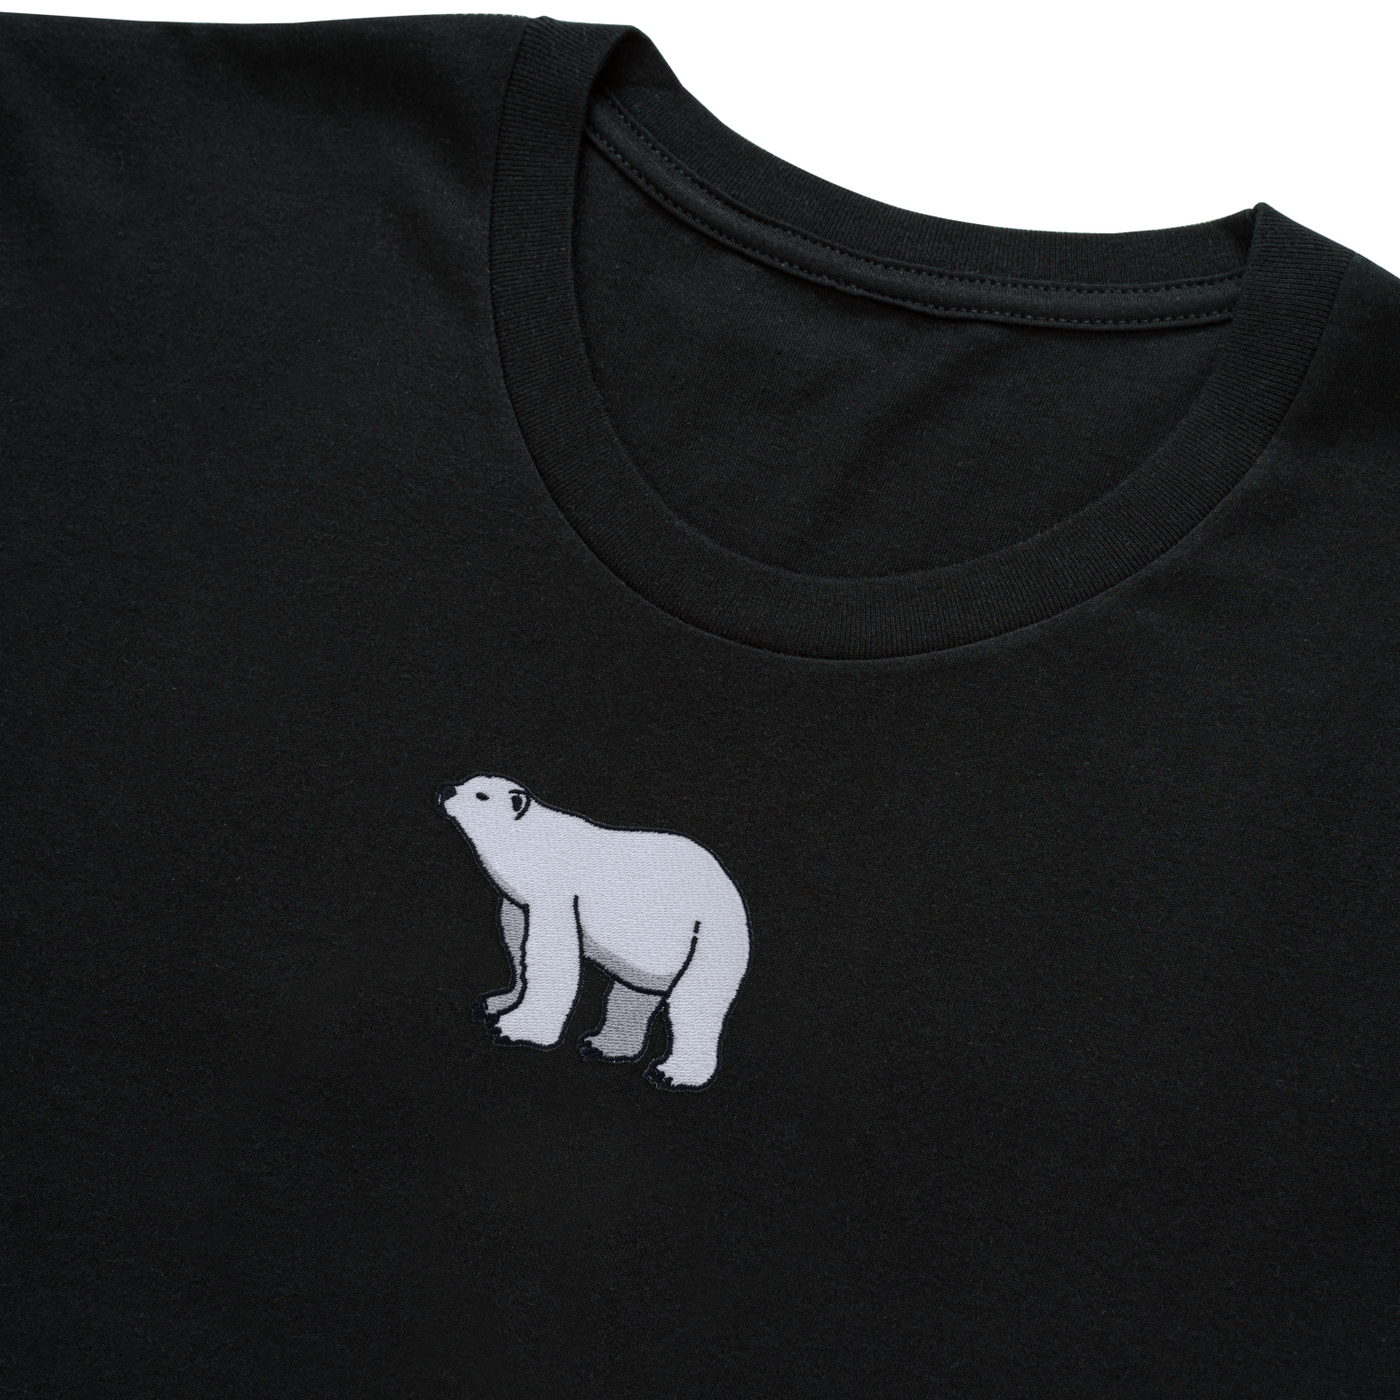 Bobby's Planet Men's Embroidered Polar Bear T-Shirt from Arctic Polar Animals Collection in Black Color#color_black